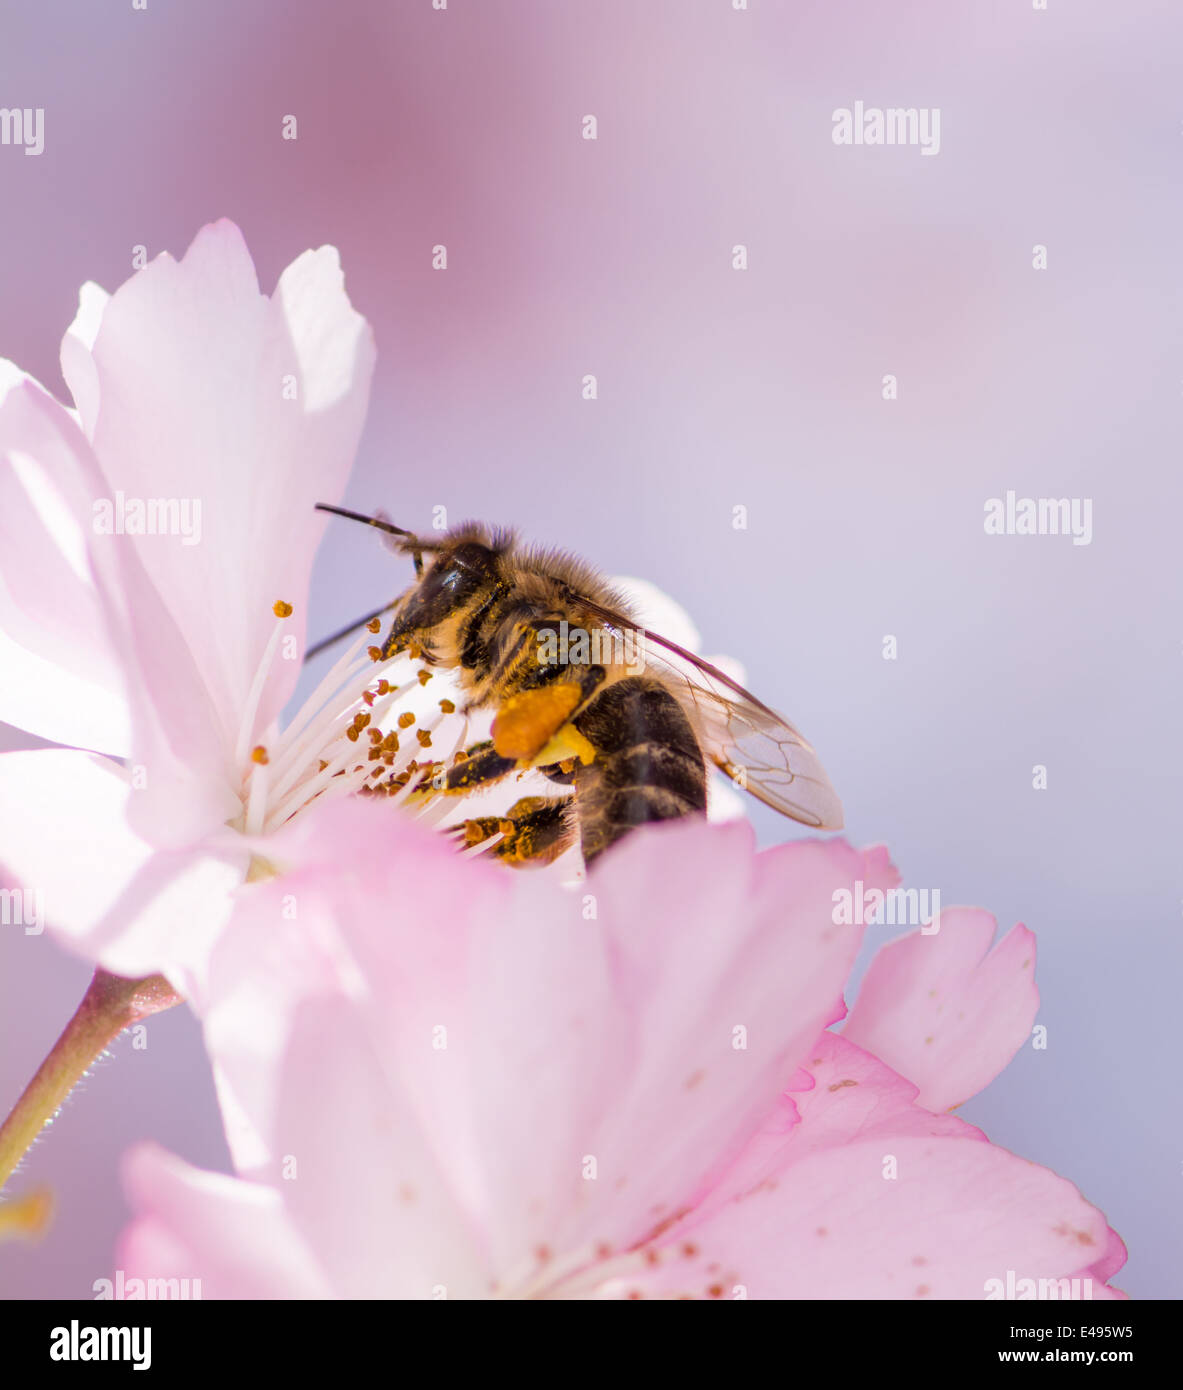 Honeybee collecting pollen at a pink cherry blossom Stock Photo